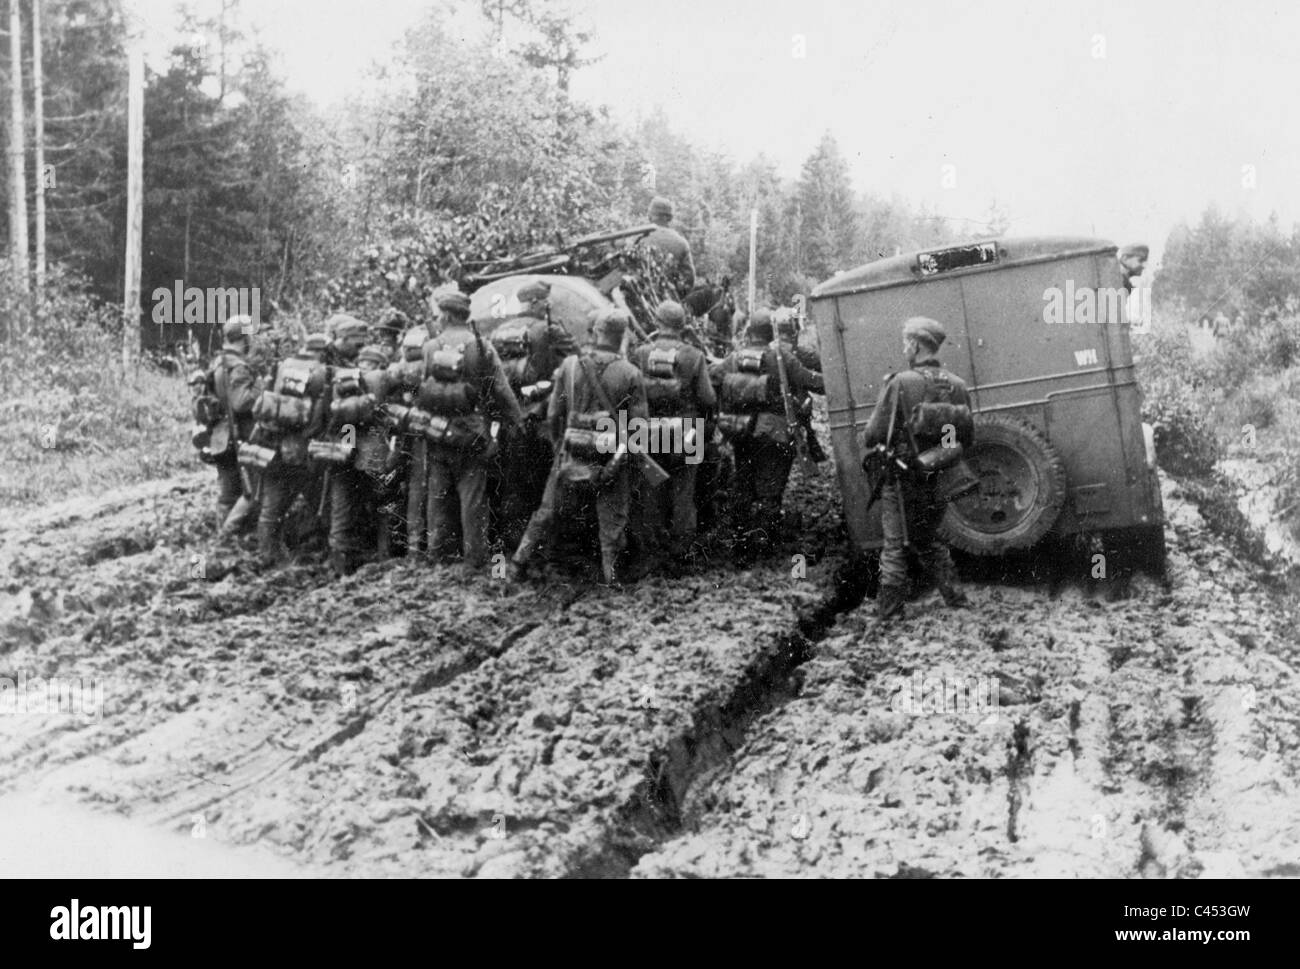 [Image: military-vehicles-in-mud-on-the-eastern-...C453GW.jpg]